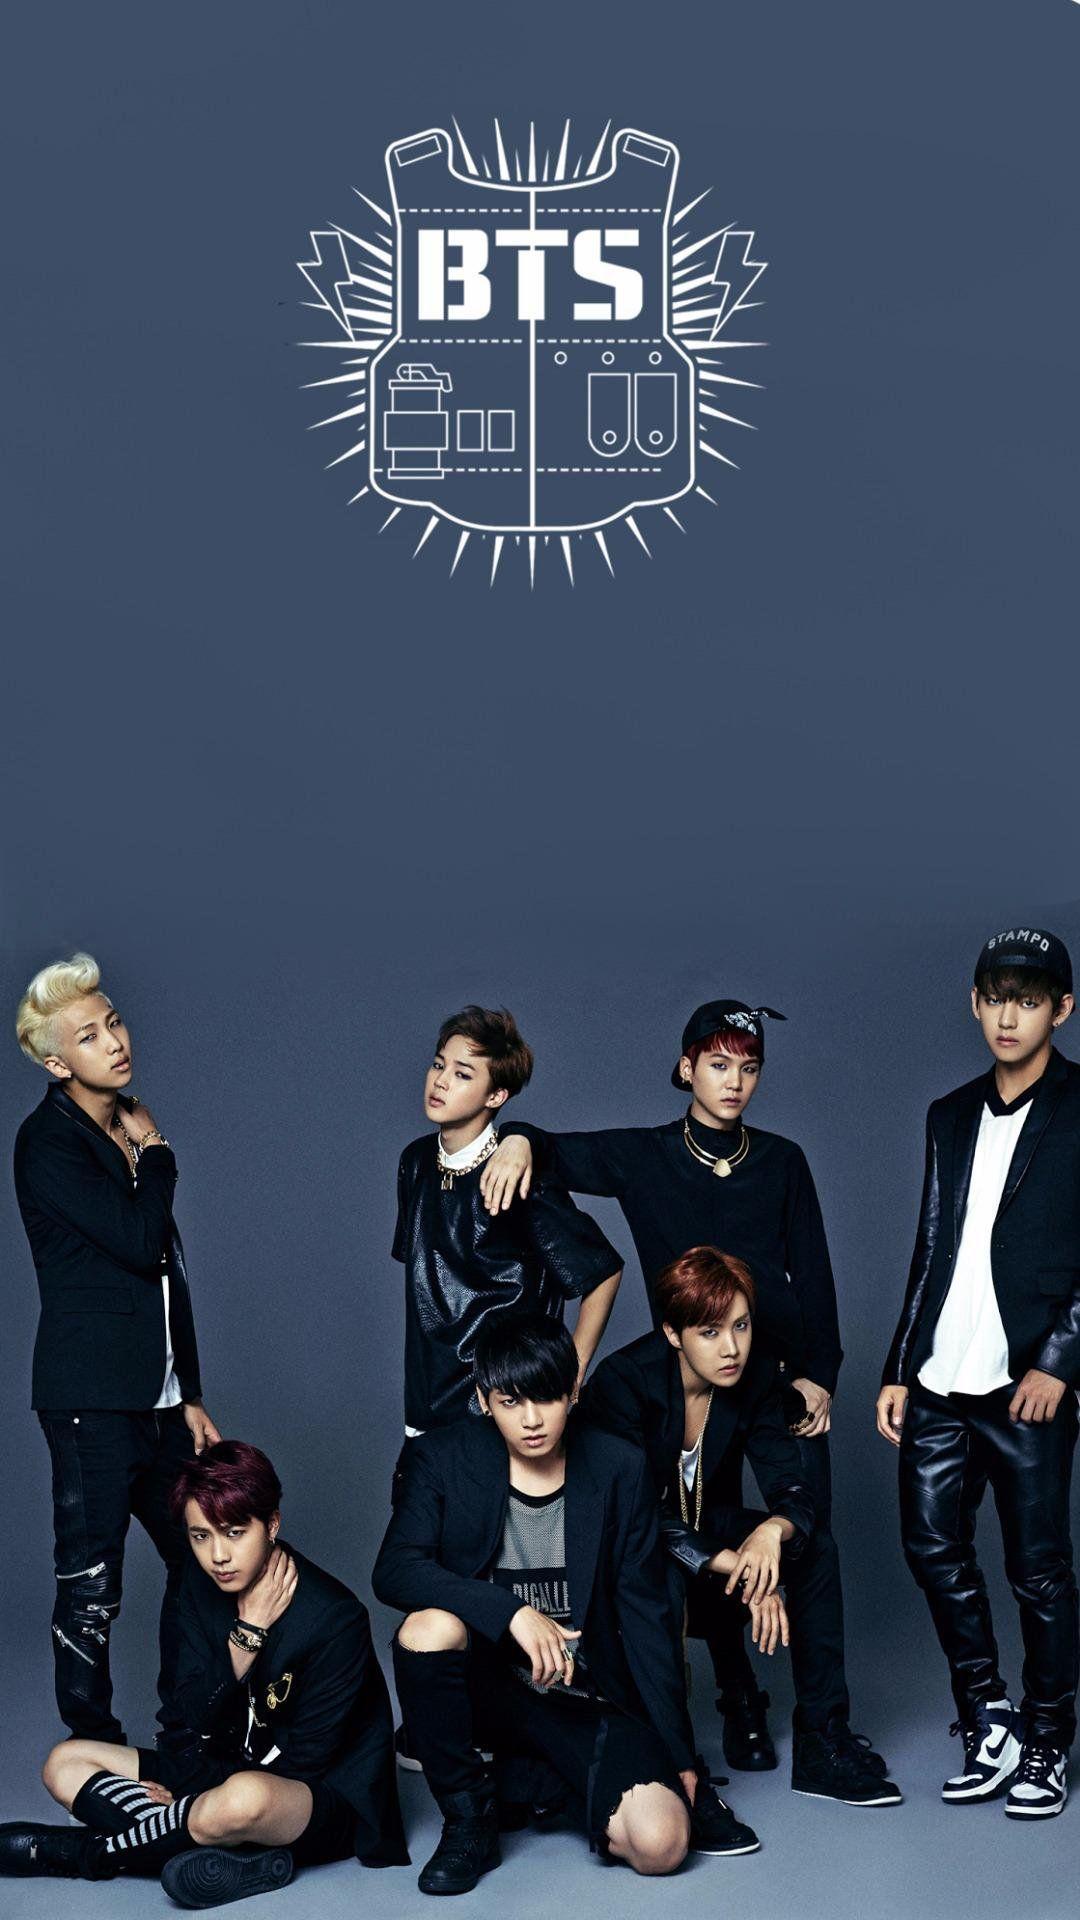 Bts Iphone Wallpapers Top Free Bts Iphone Backgrounds Wallpaperaccess